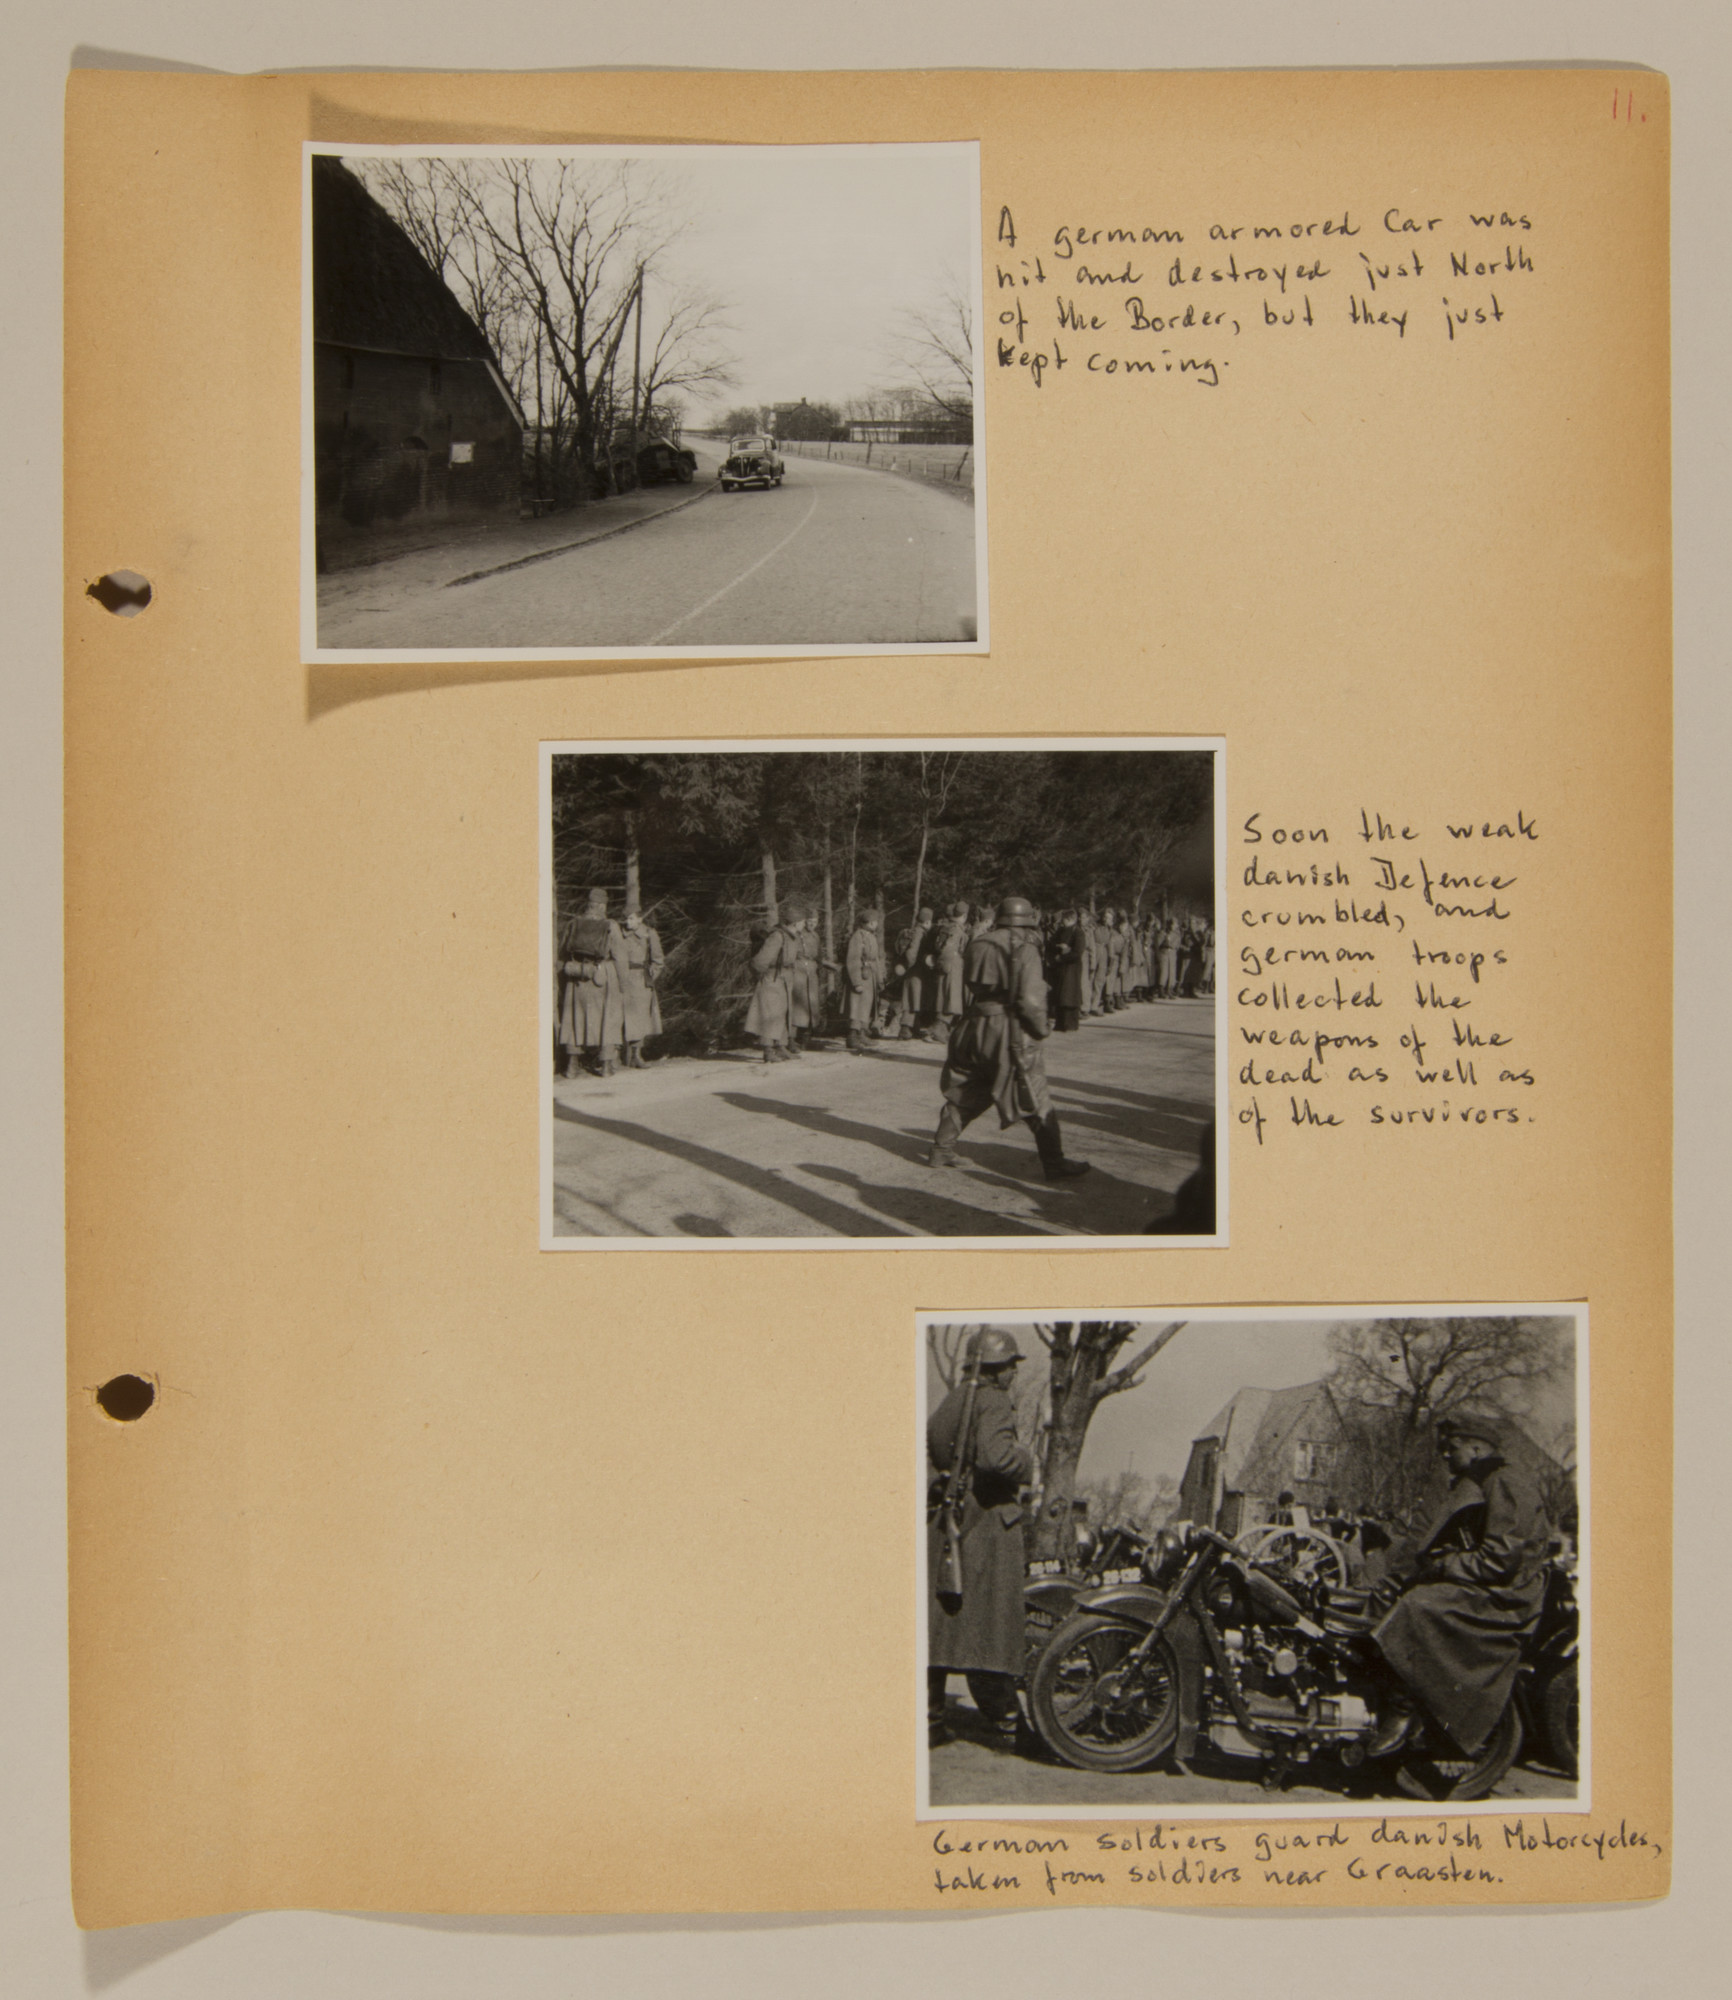 Page from volume one of a set of scrapbooks compiled by Bjorn Sibbern, a Danish policeman and resistance member, documenting the German occupation of Denmark.

This page documents the German invasion.